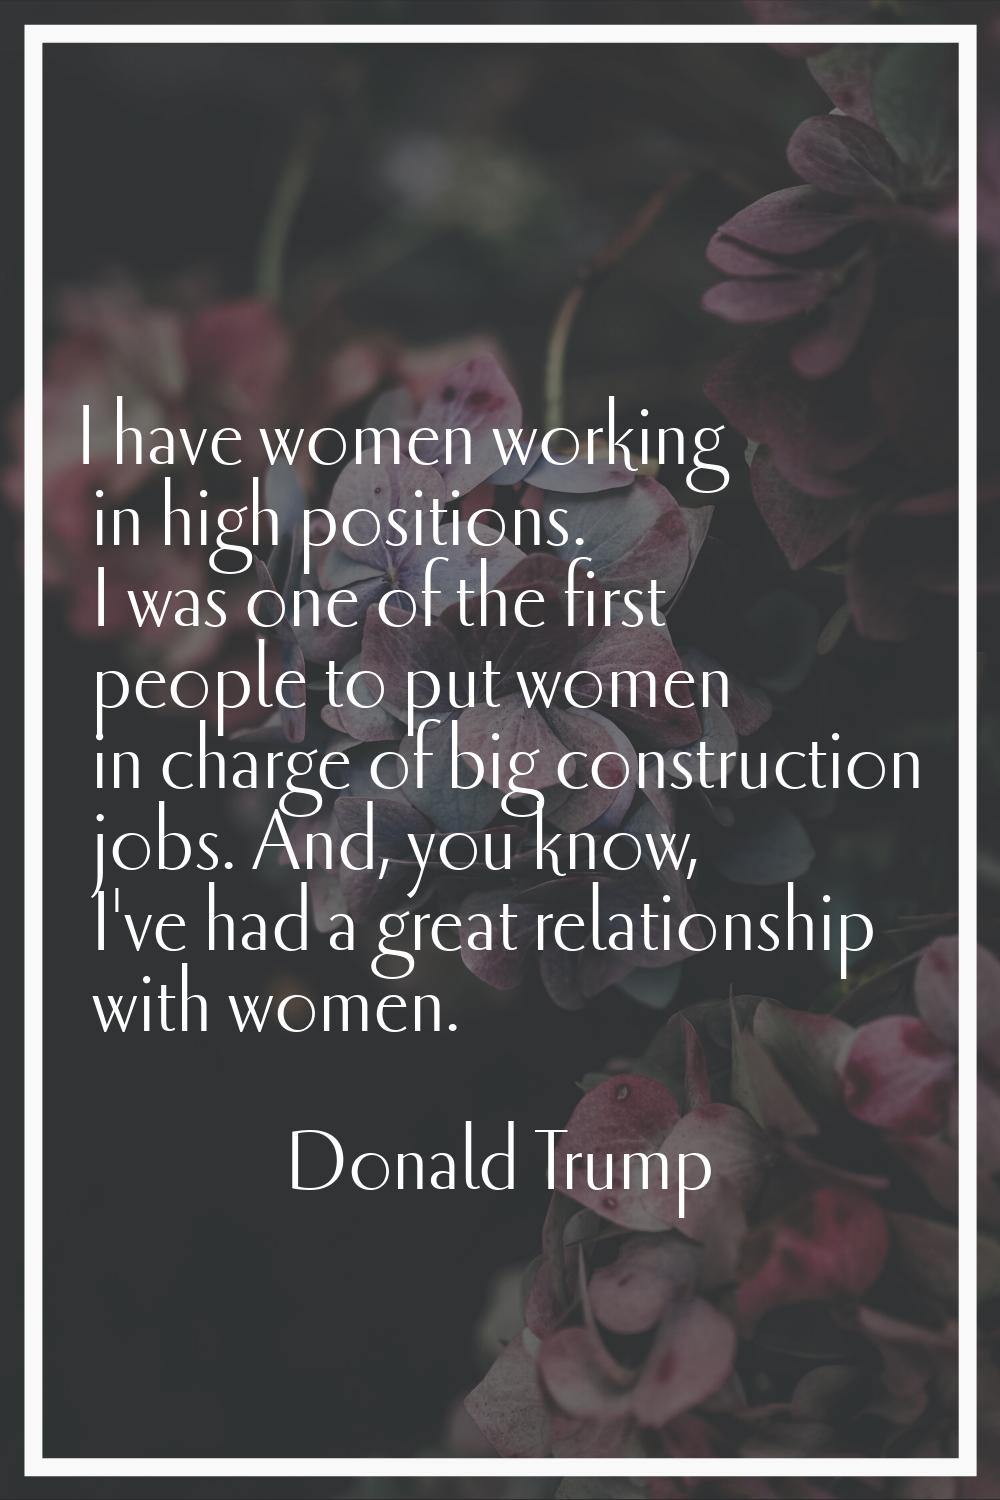 I have women working in high positions. I was one of the first people to put women in charge of big